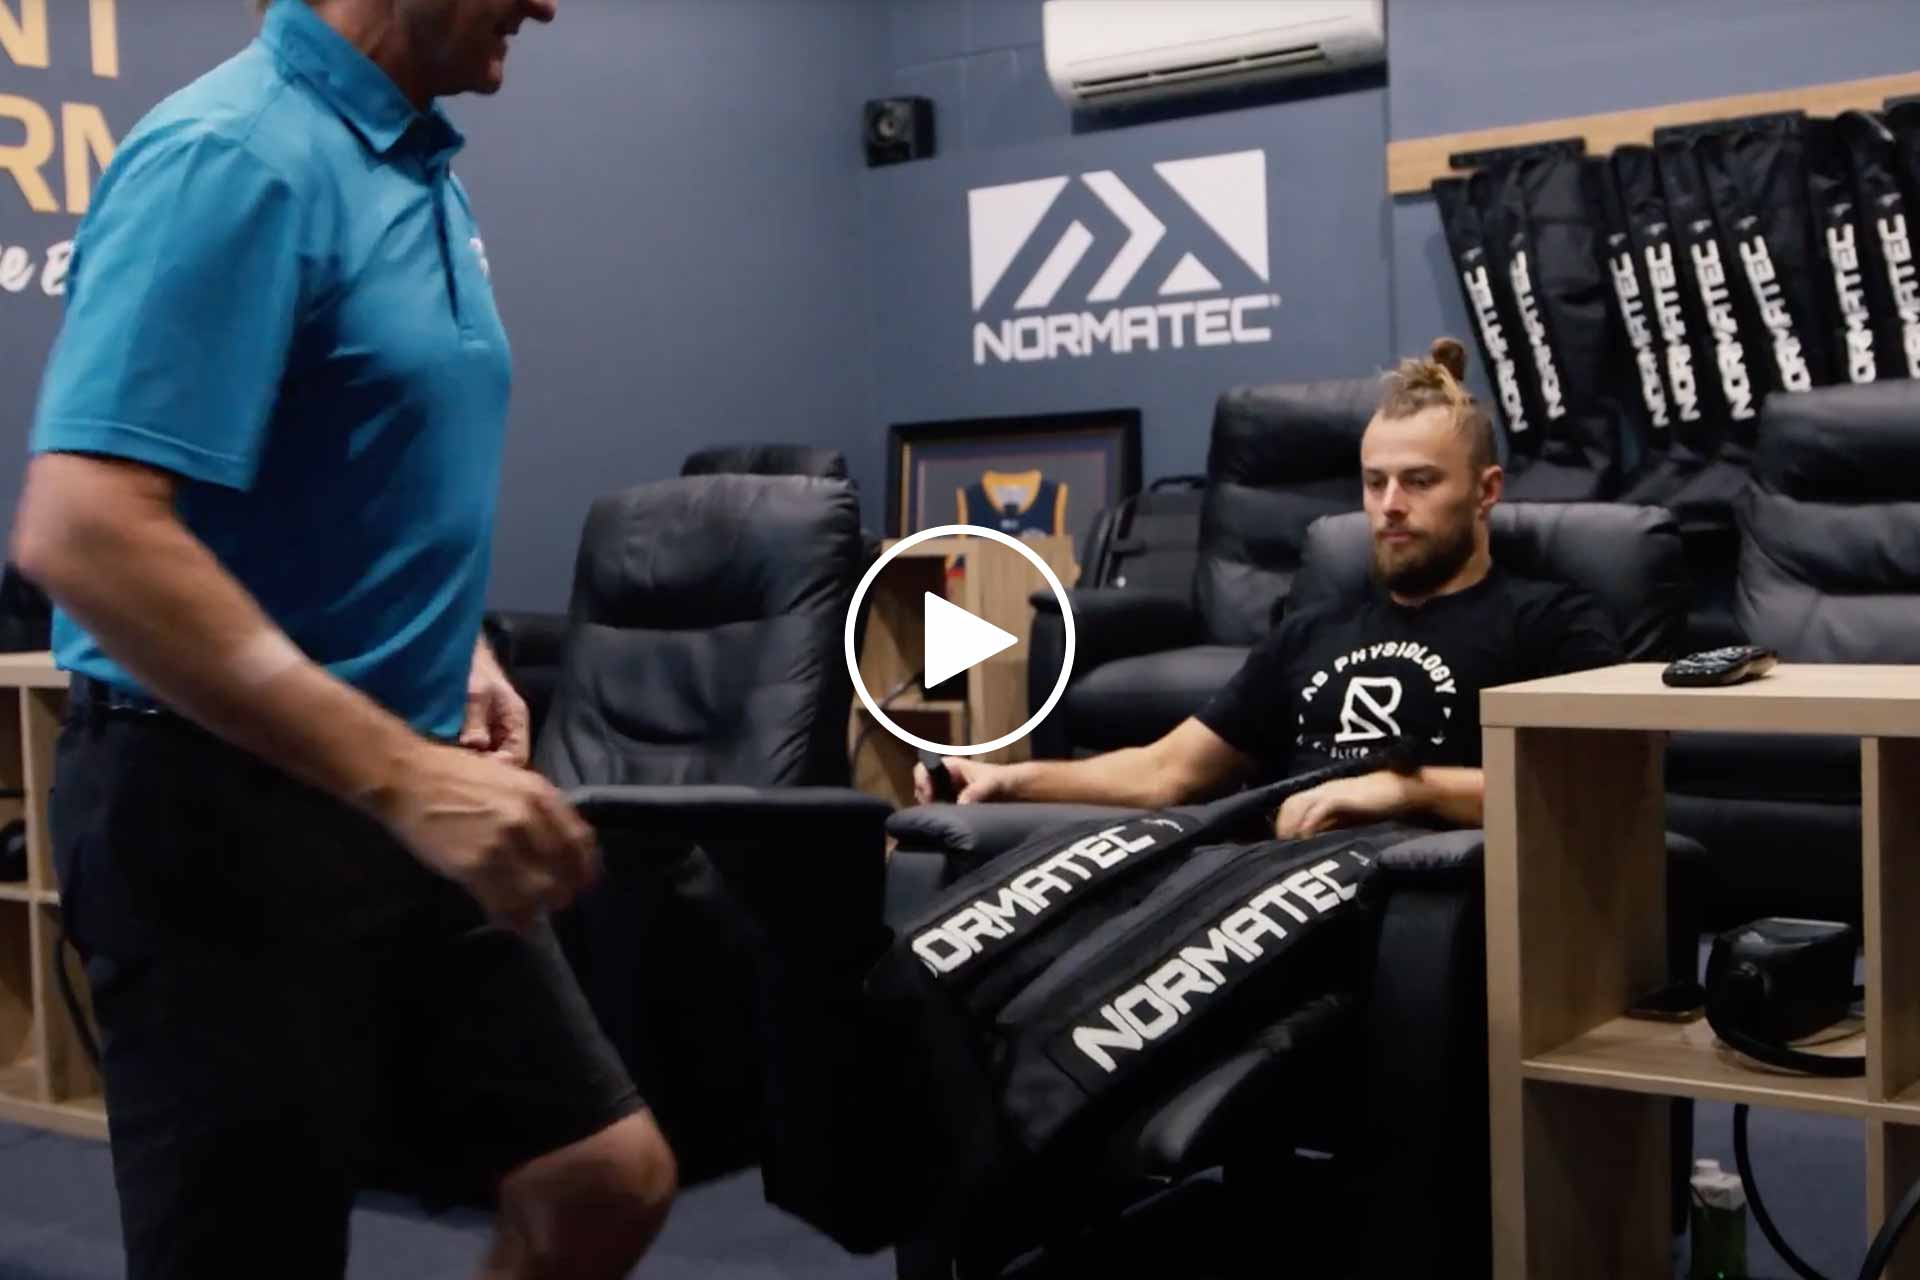 Man helping another man wear P3 recovery normatec Compression Therapy garments